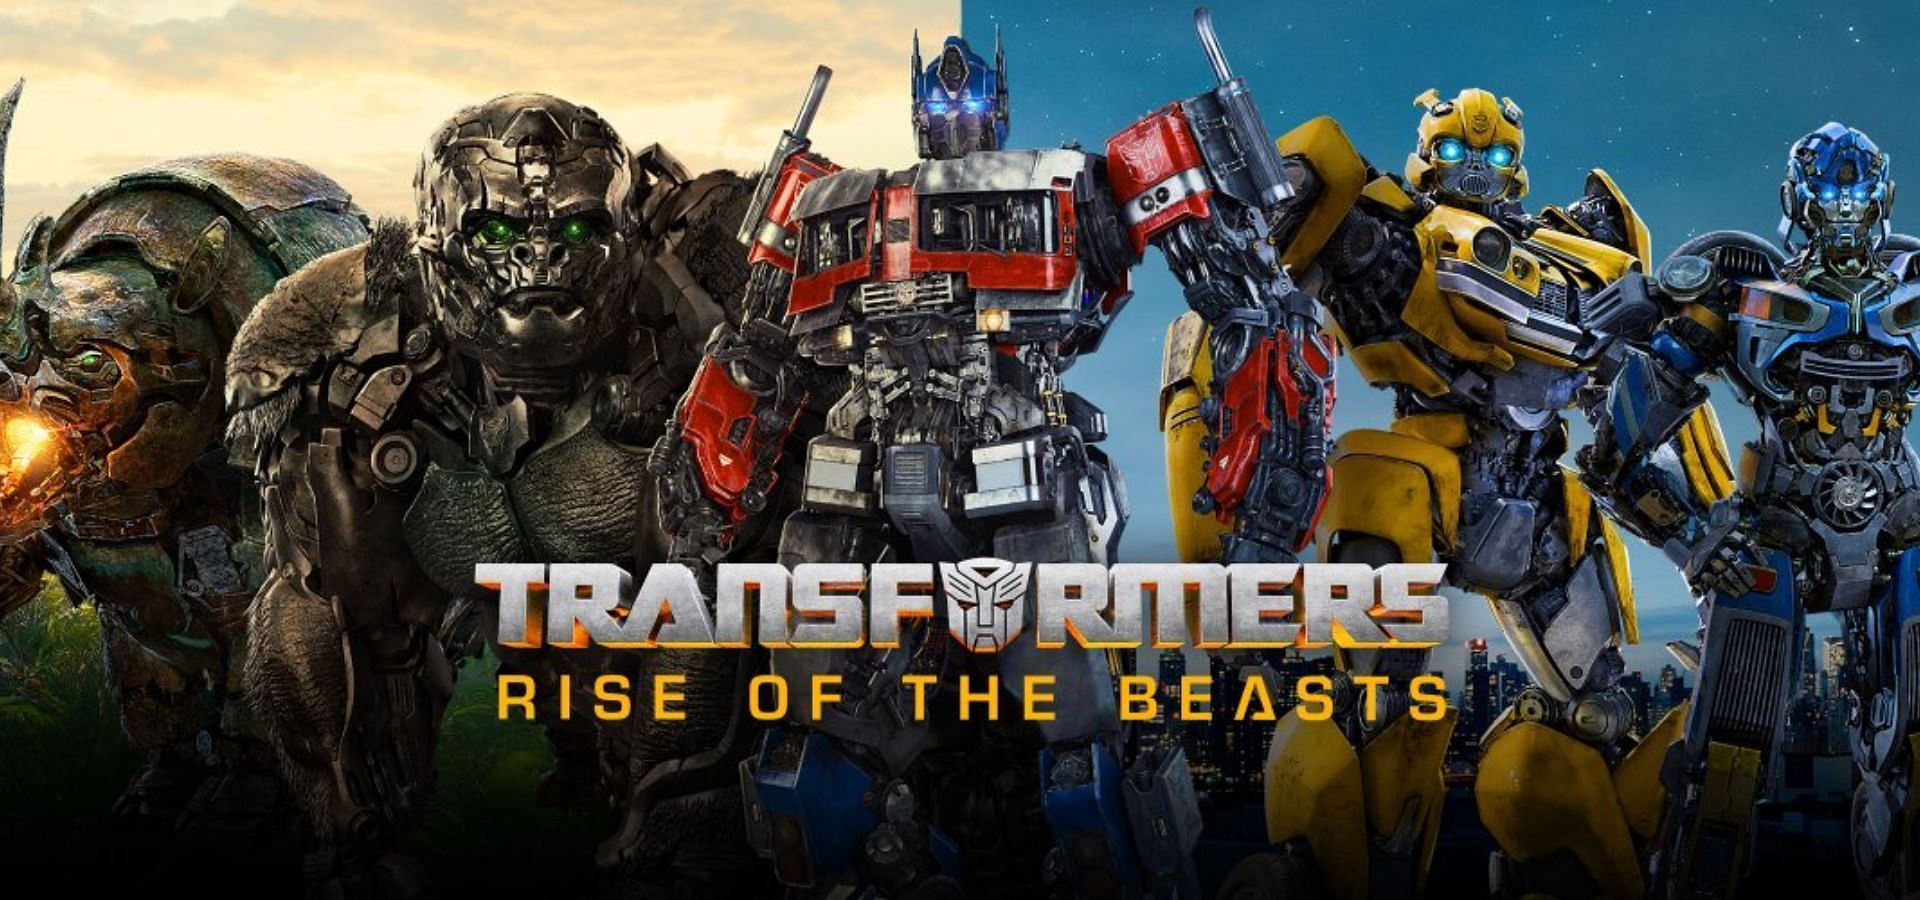 Transformers: Rise of the Beasts (Image via Twitter/@transformers)